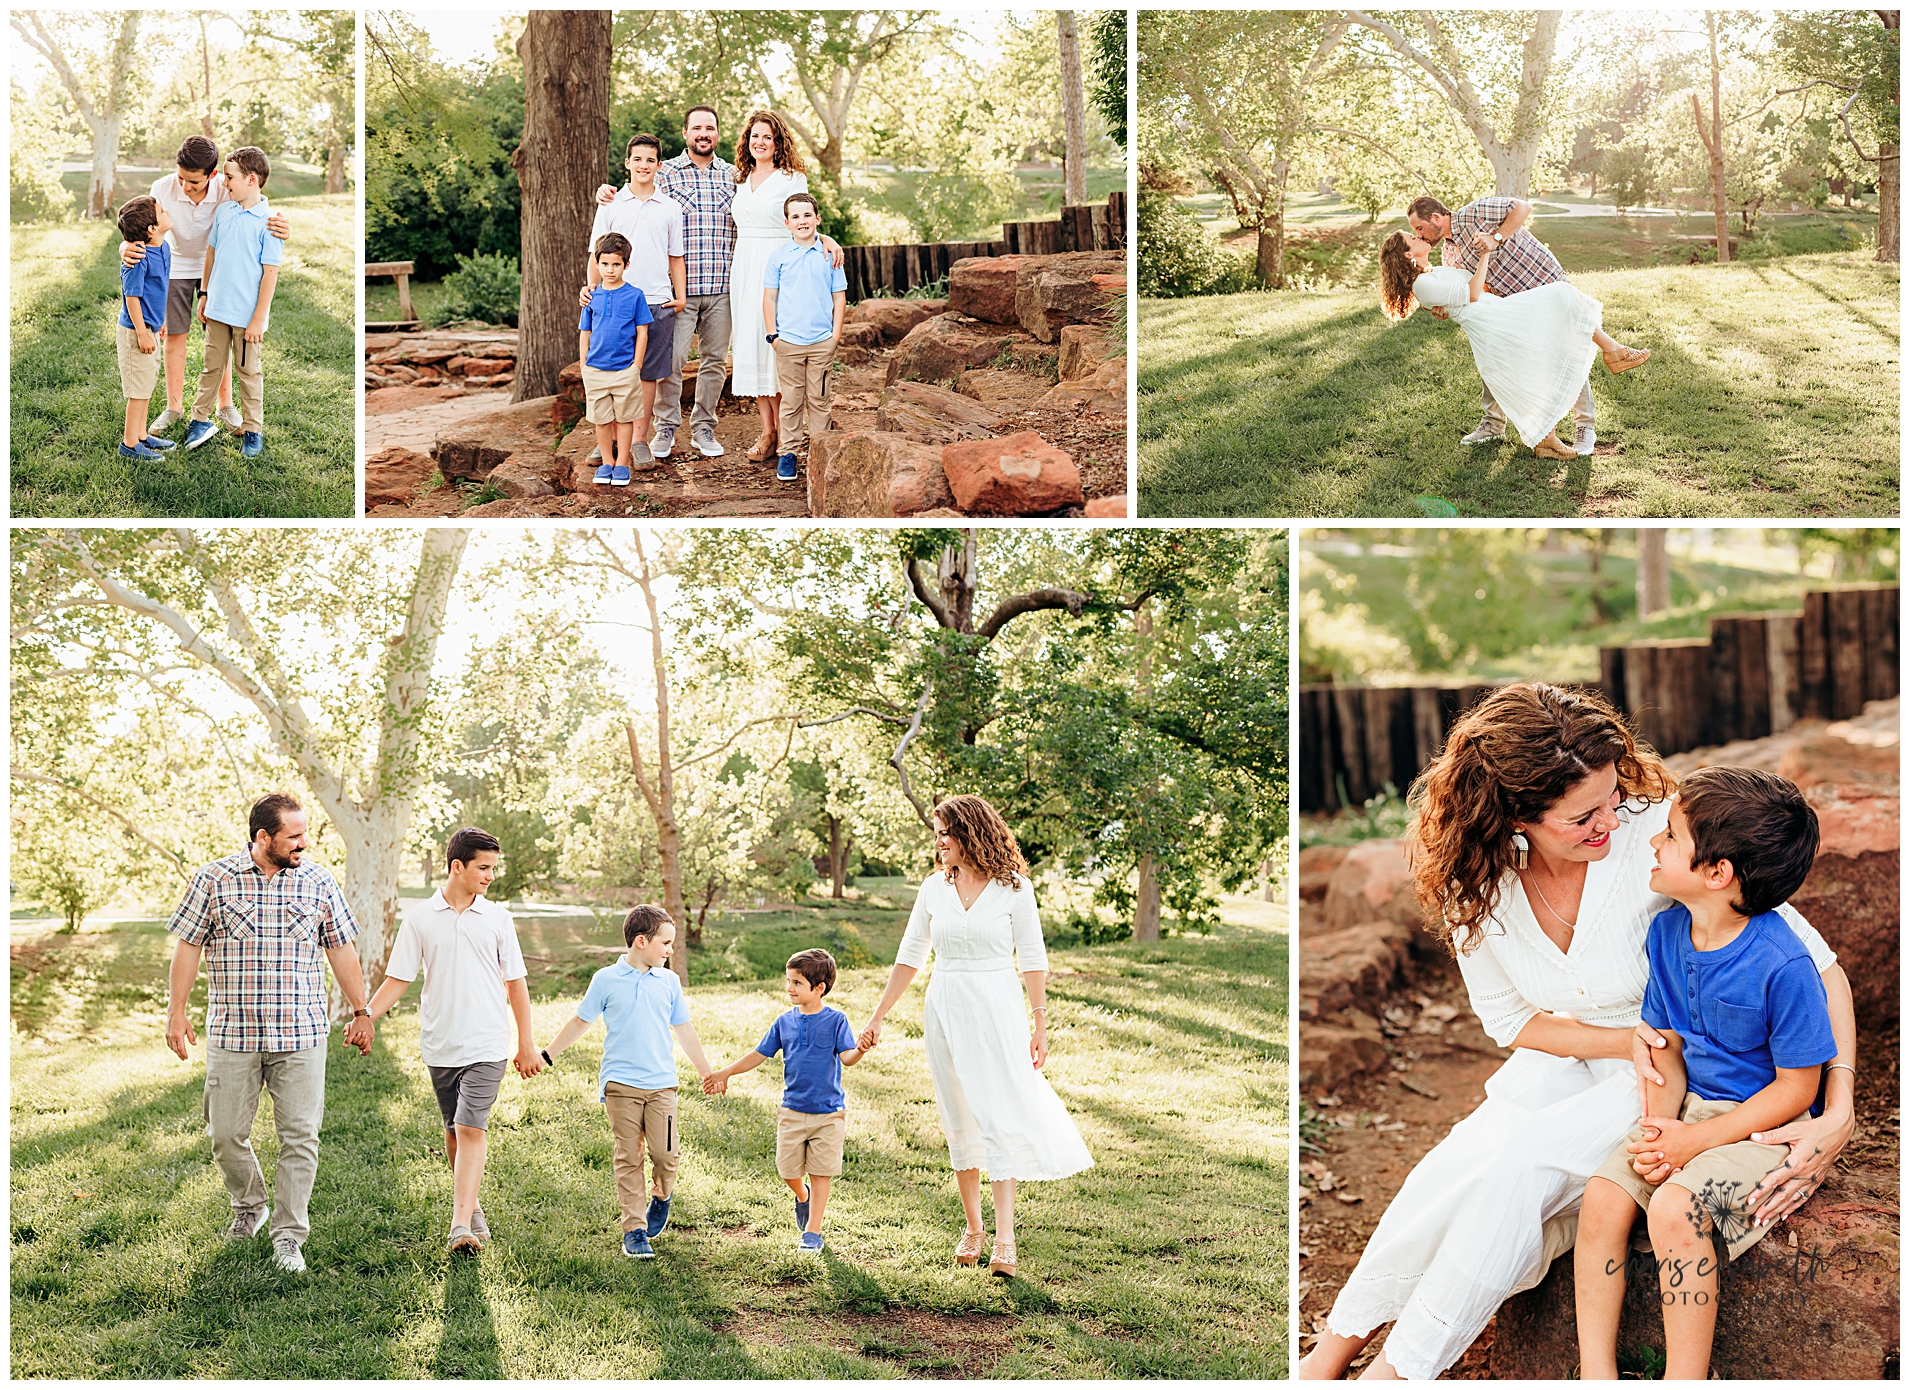 Family of 5 during a photo session at Will Rogers Botanical Gardens.